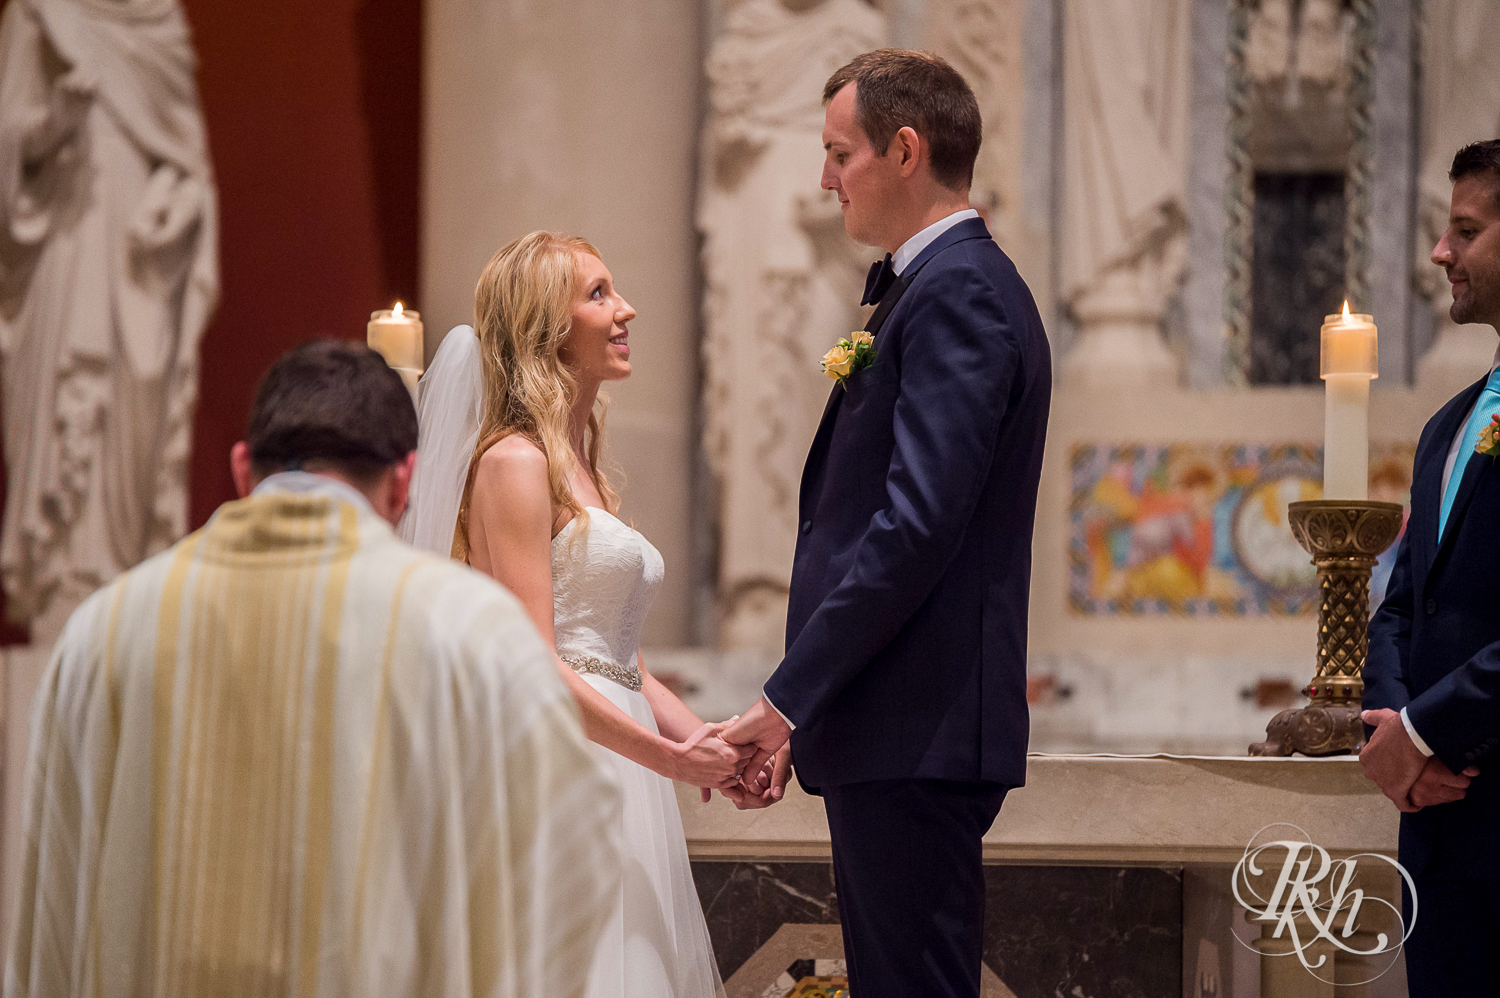 Bride and groom smile during wedding ceremony at St. Thomas Moore Catholic Church in Saint Paul, Minnesota.